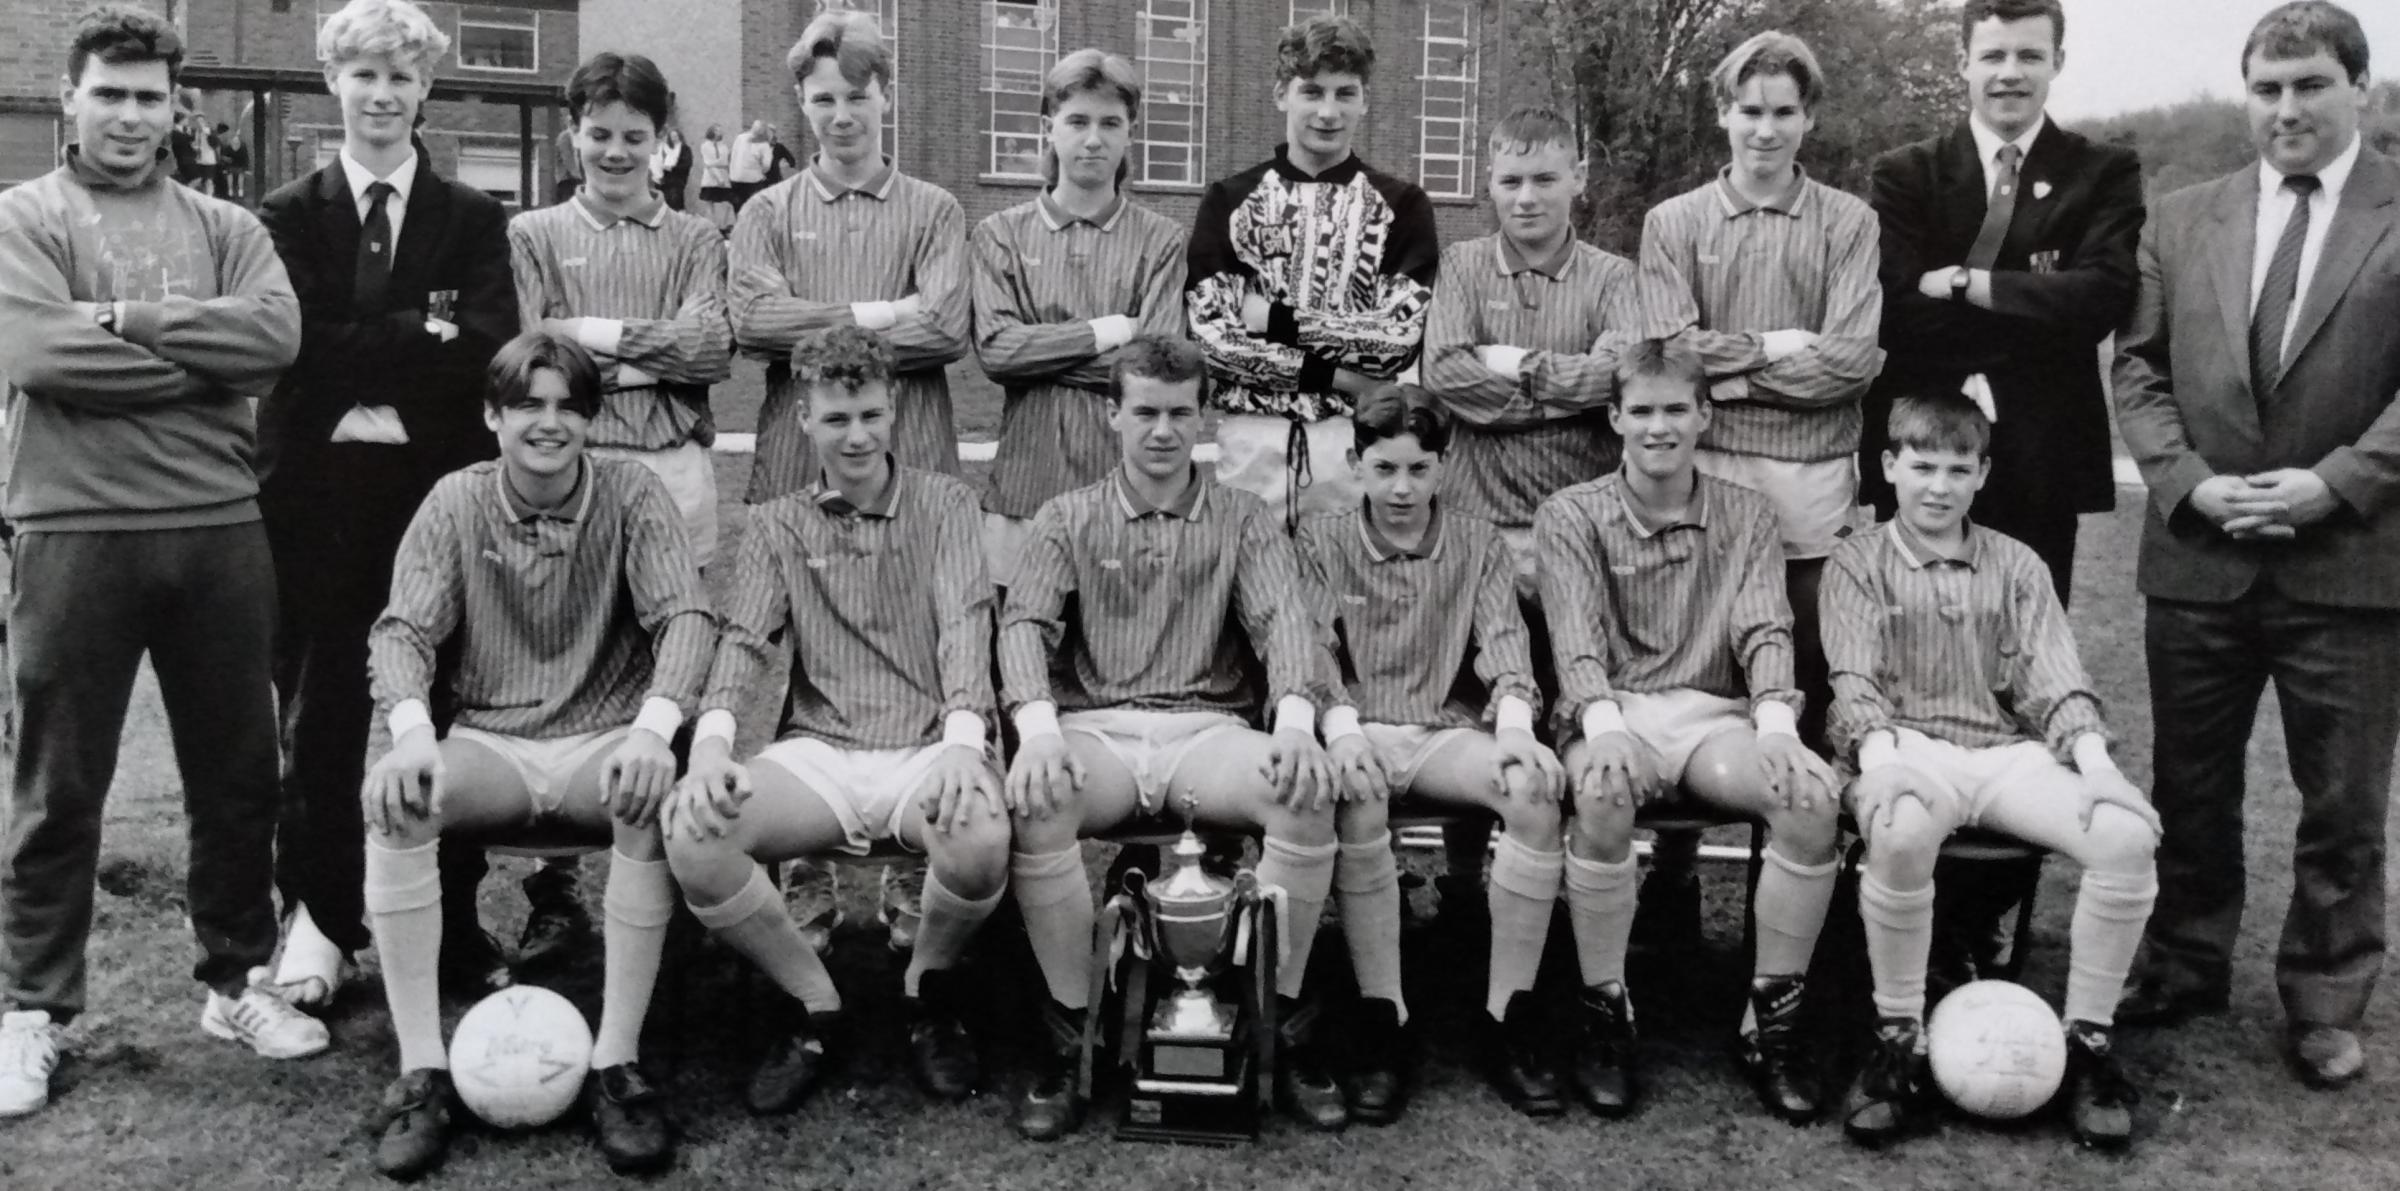 The school’s under-16s football team line up for the camera